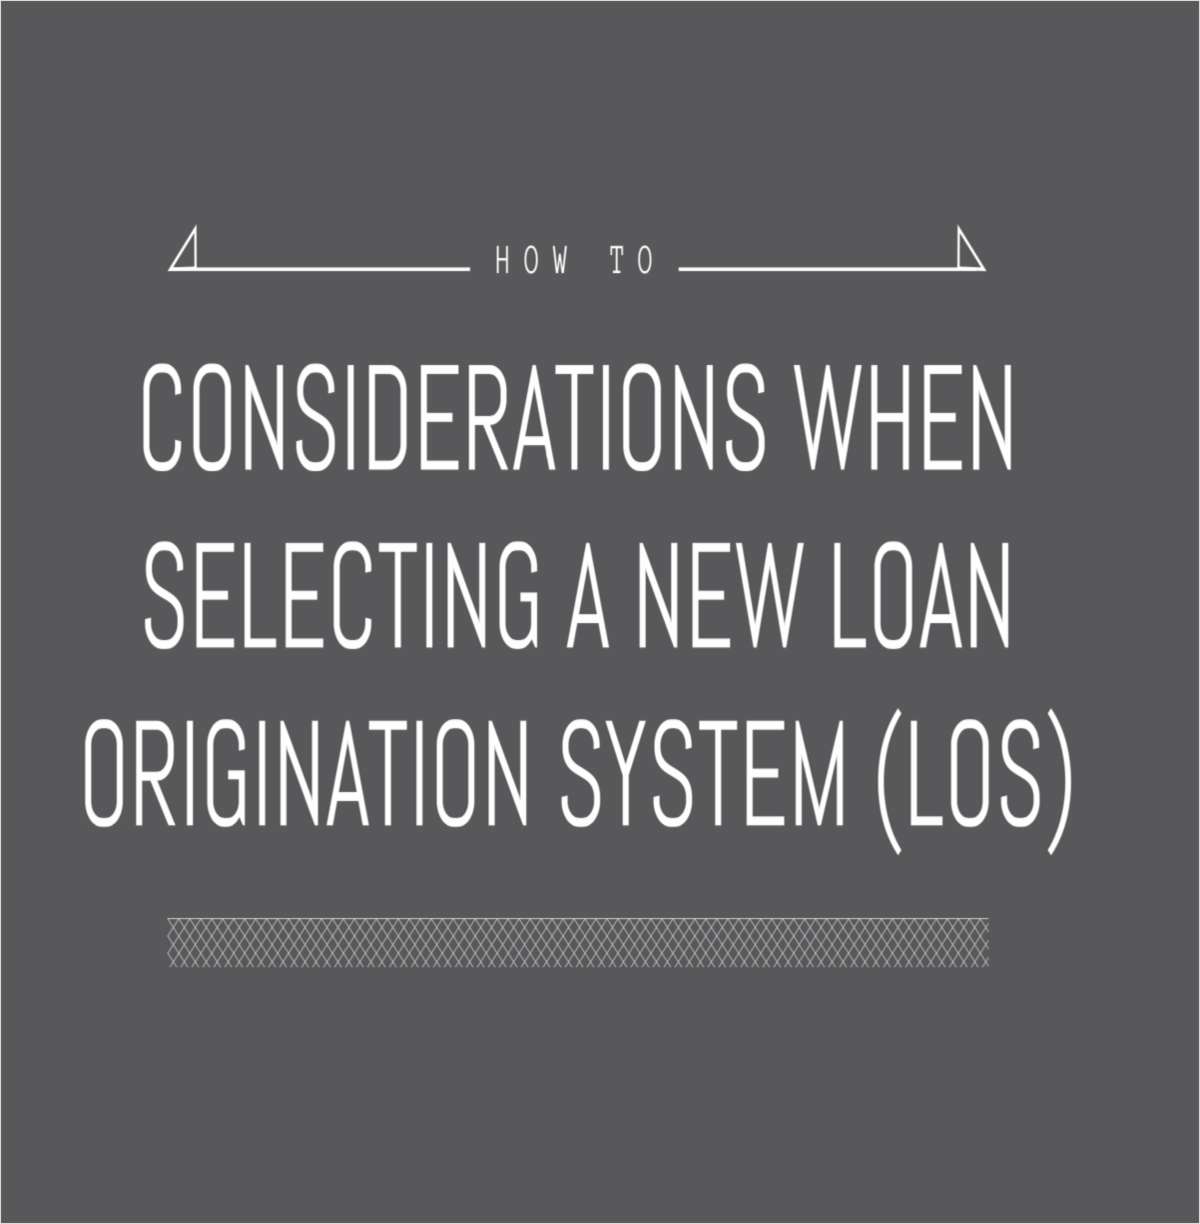 Considerations When Selecting a New Loan Origination System (LOS)